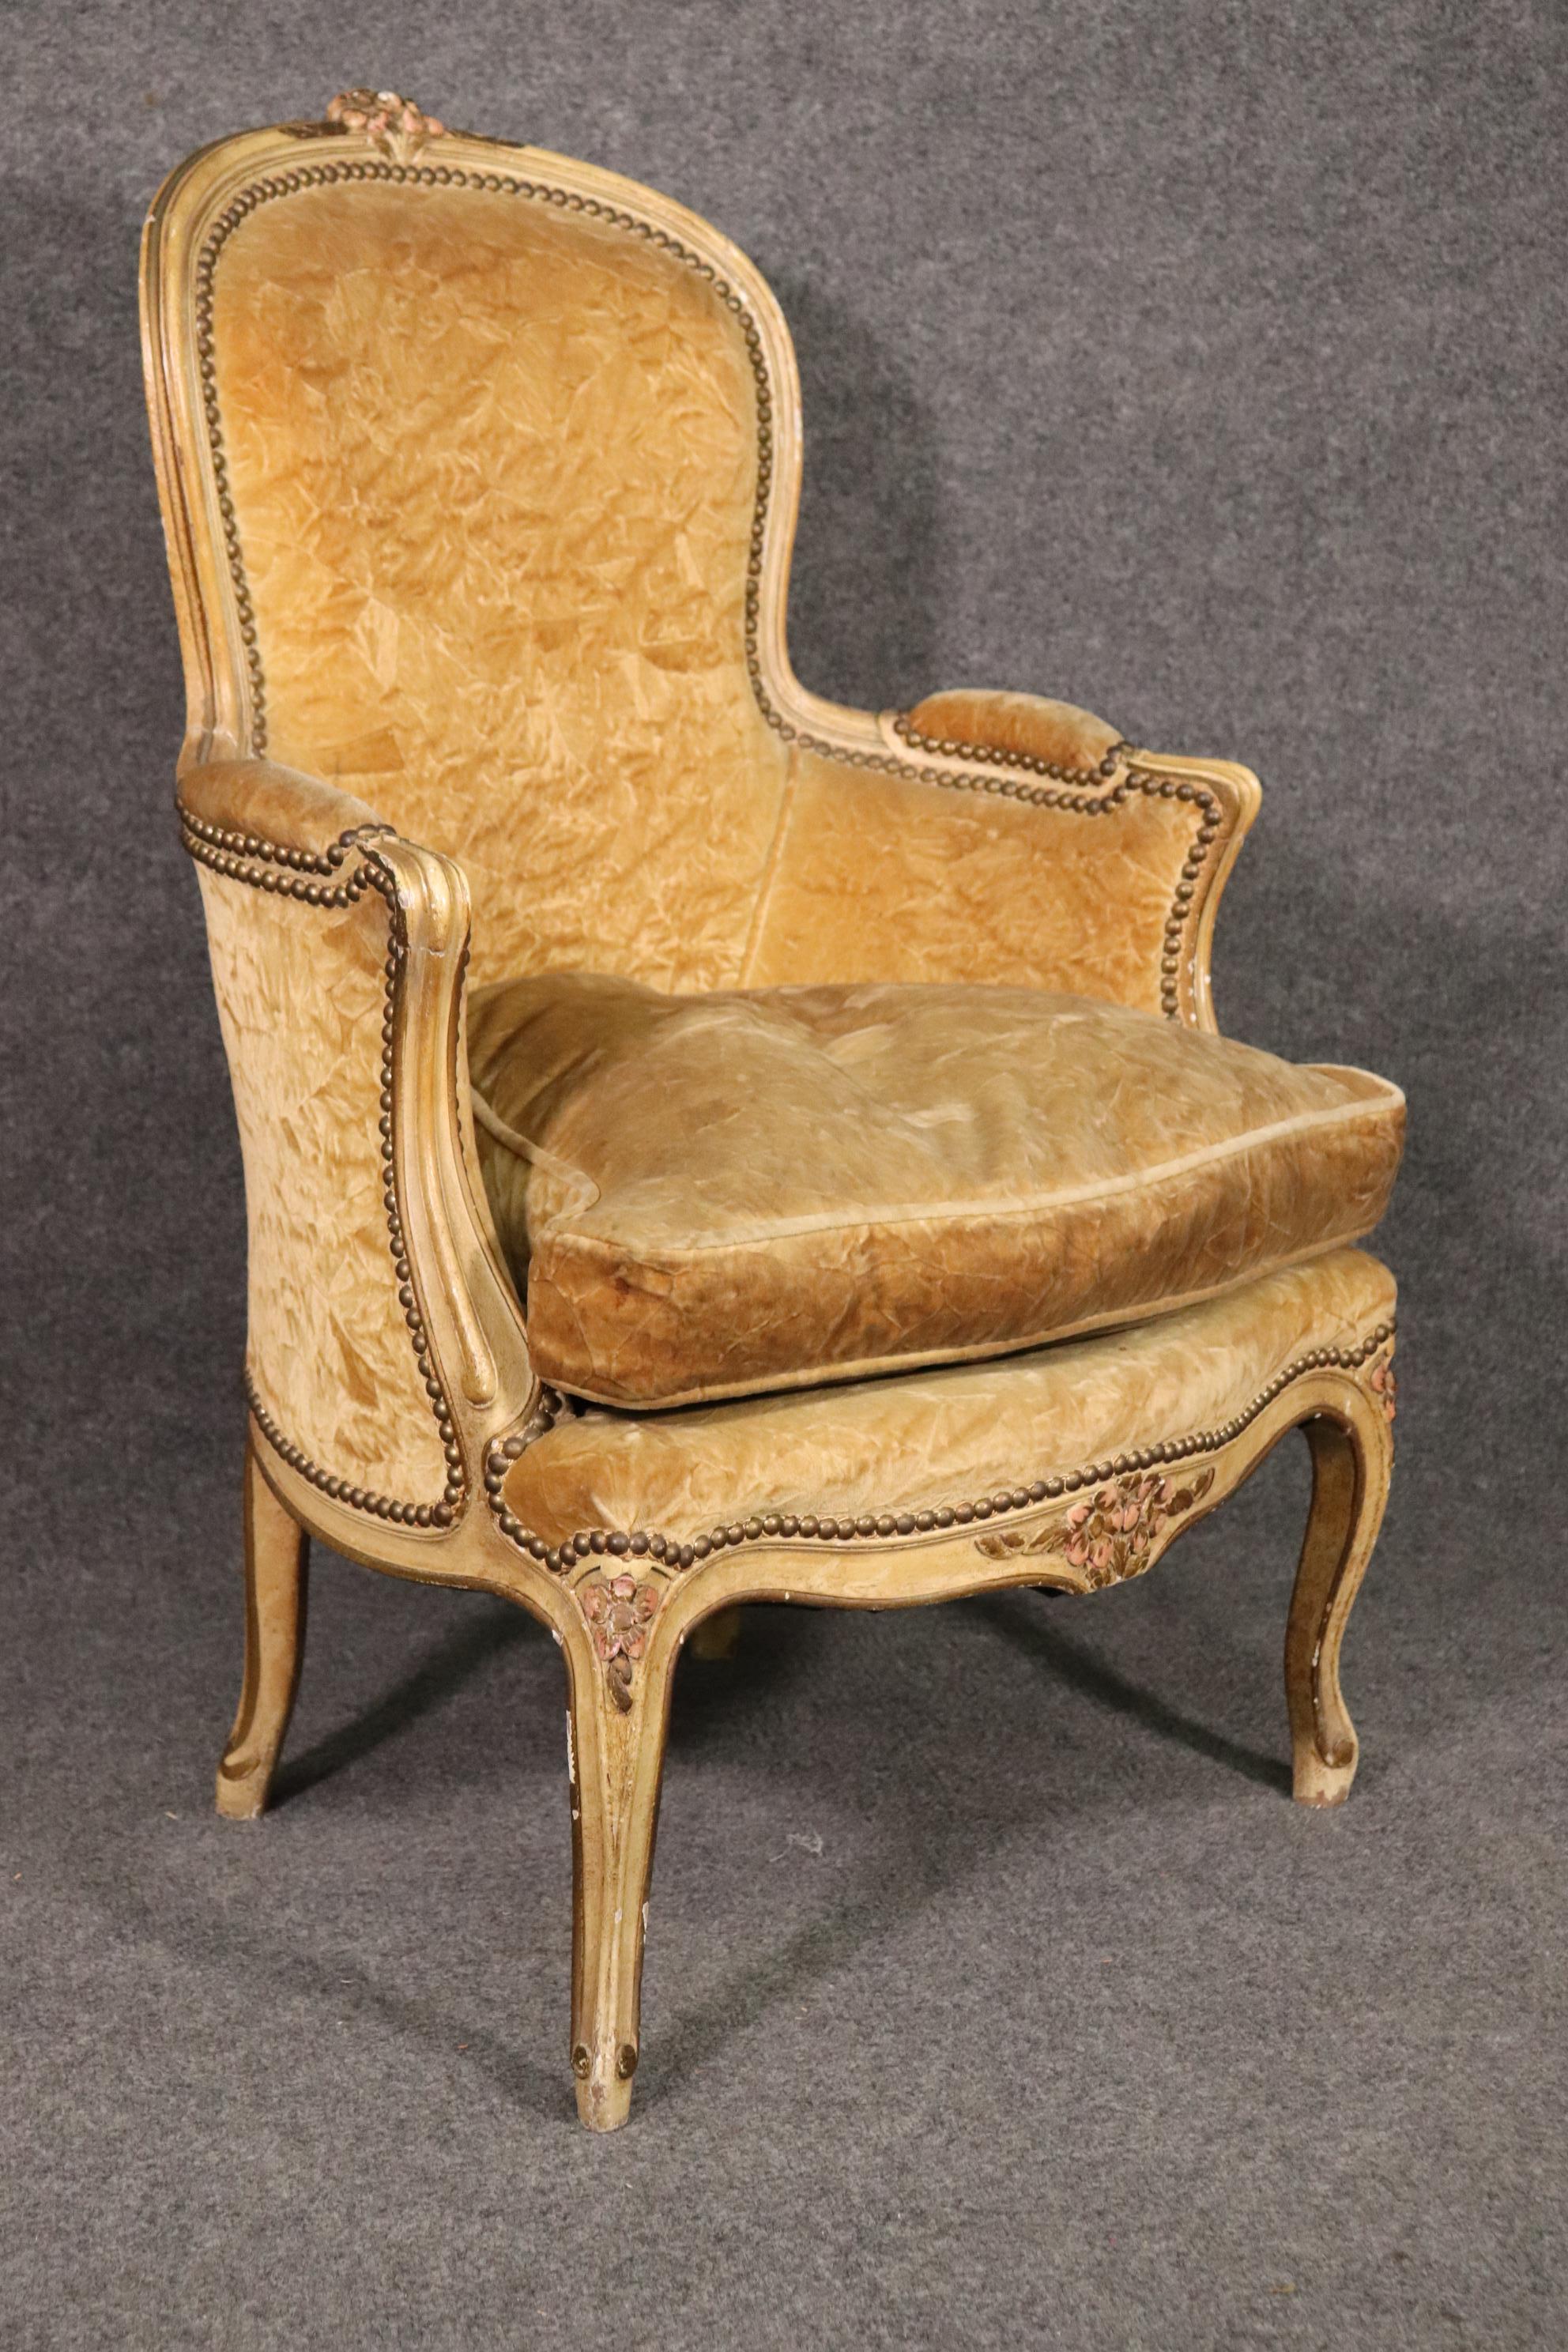 This is a superb signed Maison Jansen Bergere chair in a gold crushed velvet fabric. The size is a medium size and in very good condition. The chair has beautiful lines and even the upholstery is good for its age. The chair measures 37.5 tall x 26